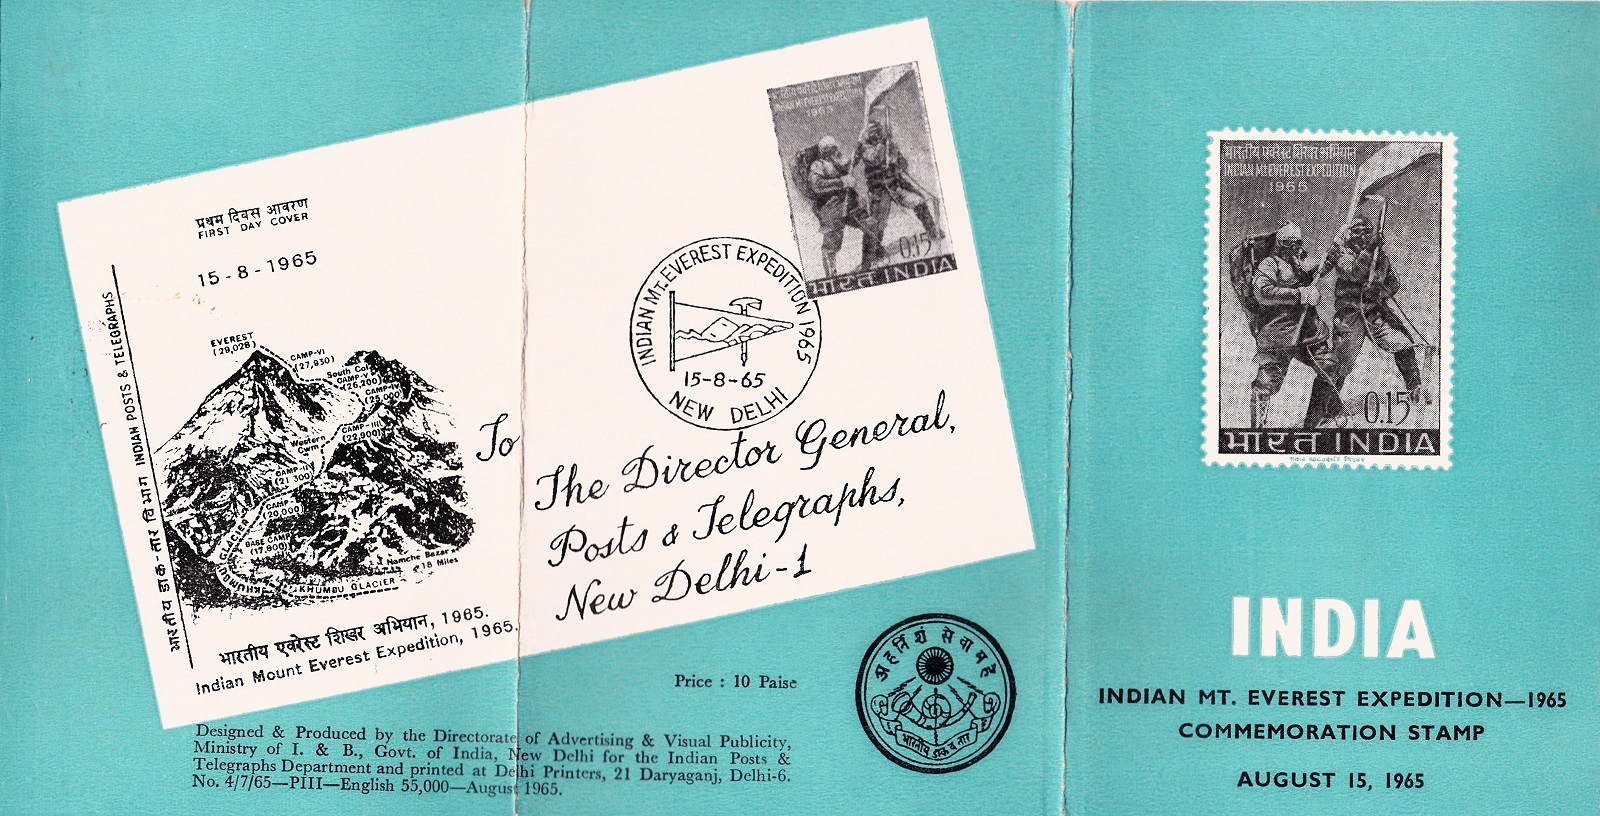  A 1965 Indian stamp dedicated to the 1965 Everest Expedition